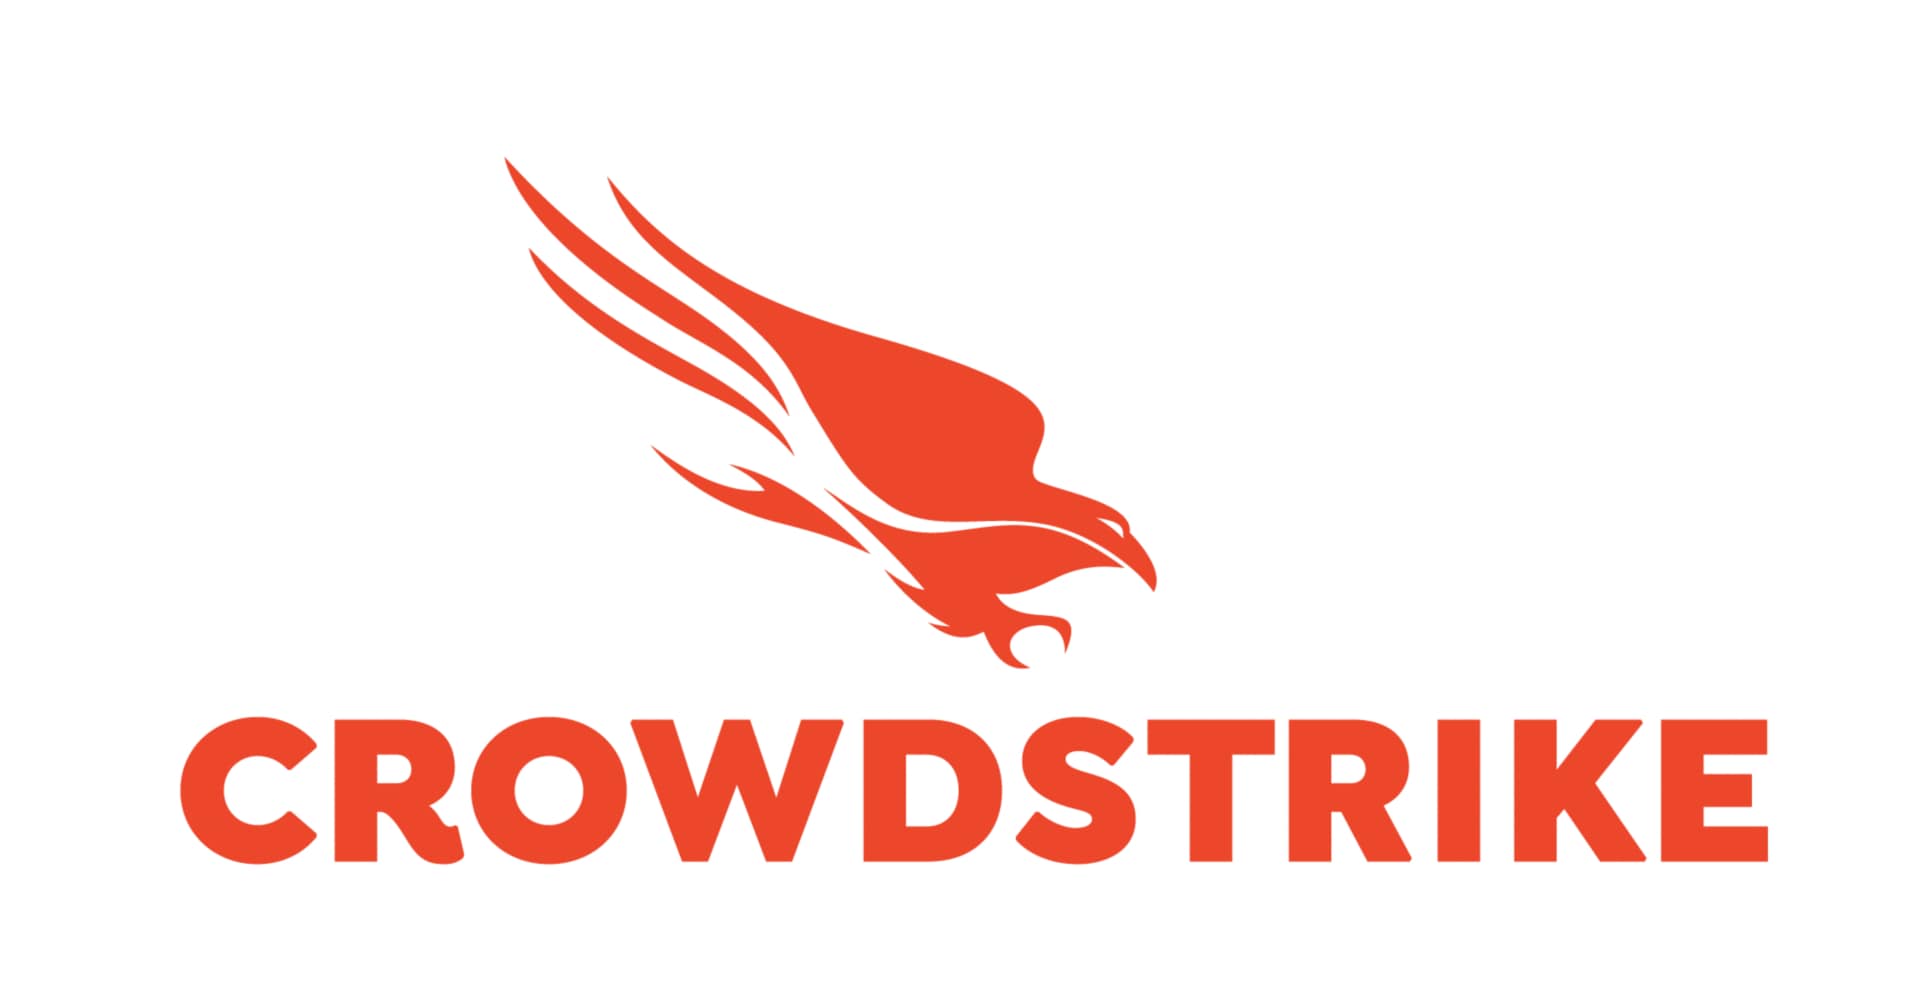 CrowdStrike 6-Month Insight for Mobile (Requires Falcon for Mobile)